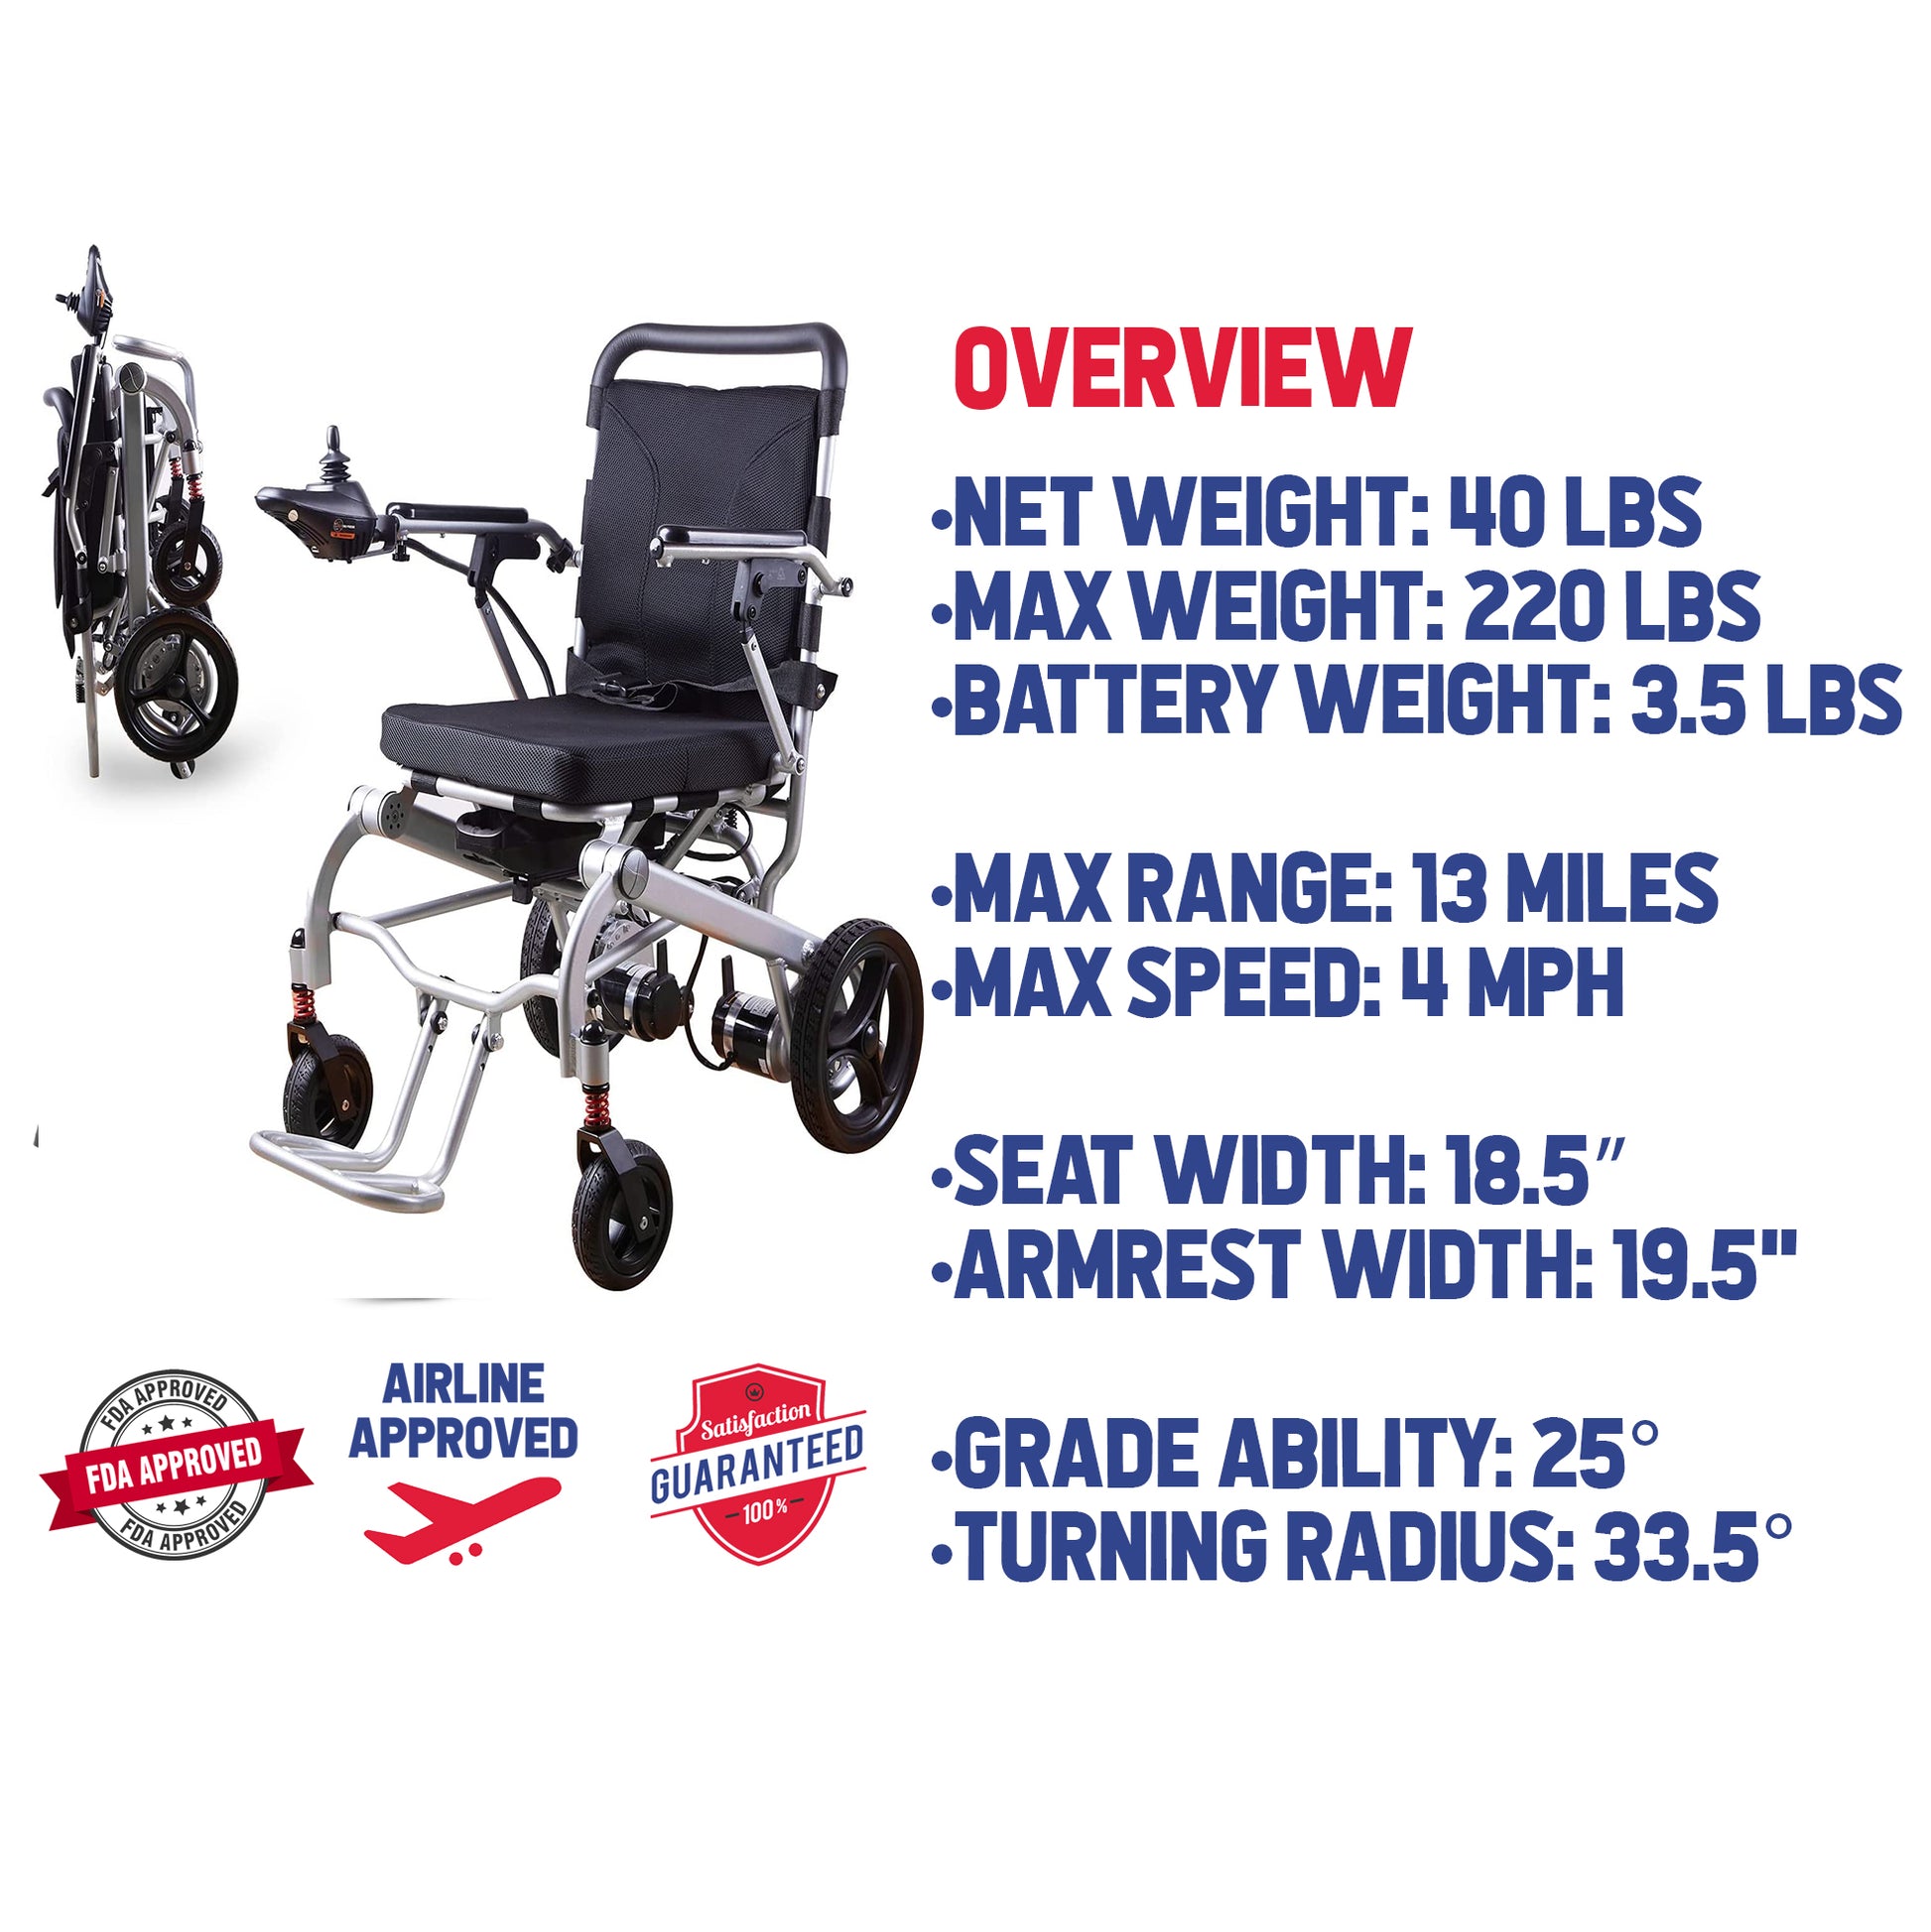 RAGER Lightweight Foldable Electric Wheelchair Weight 40lbs -Detachable Battery